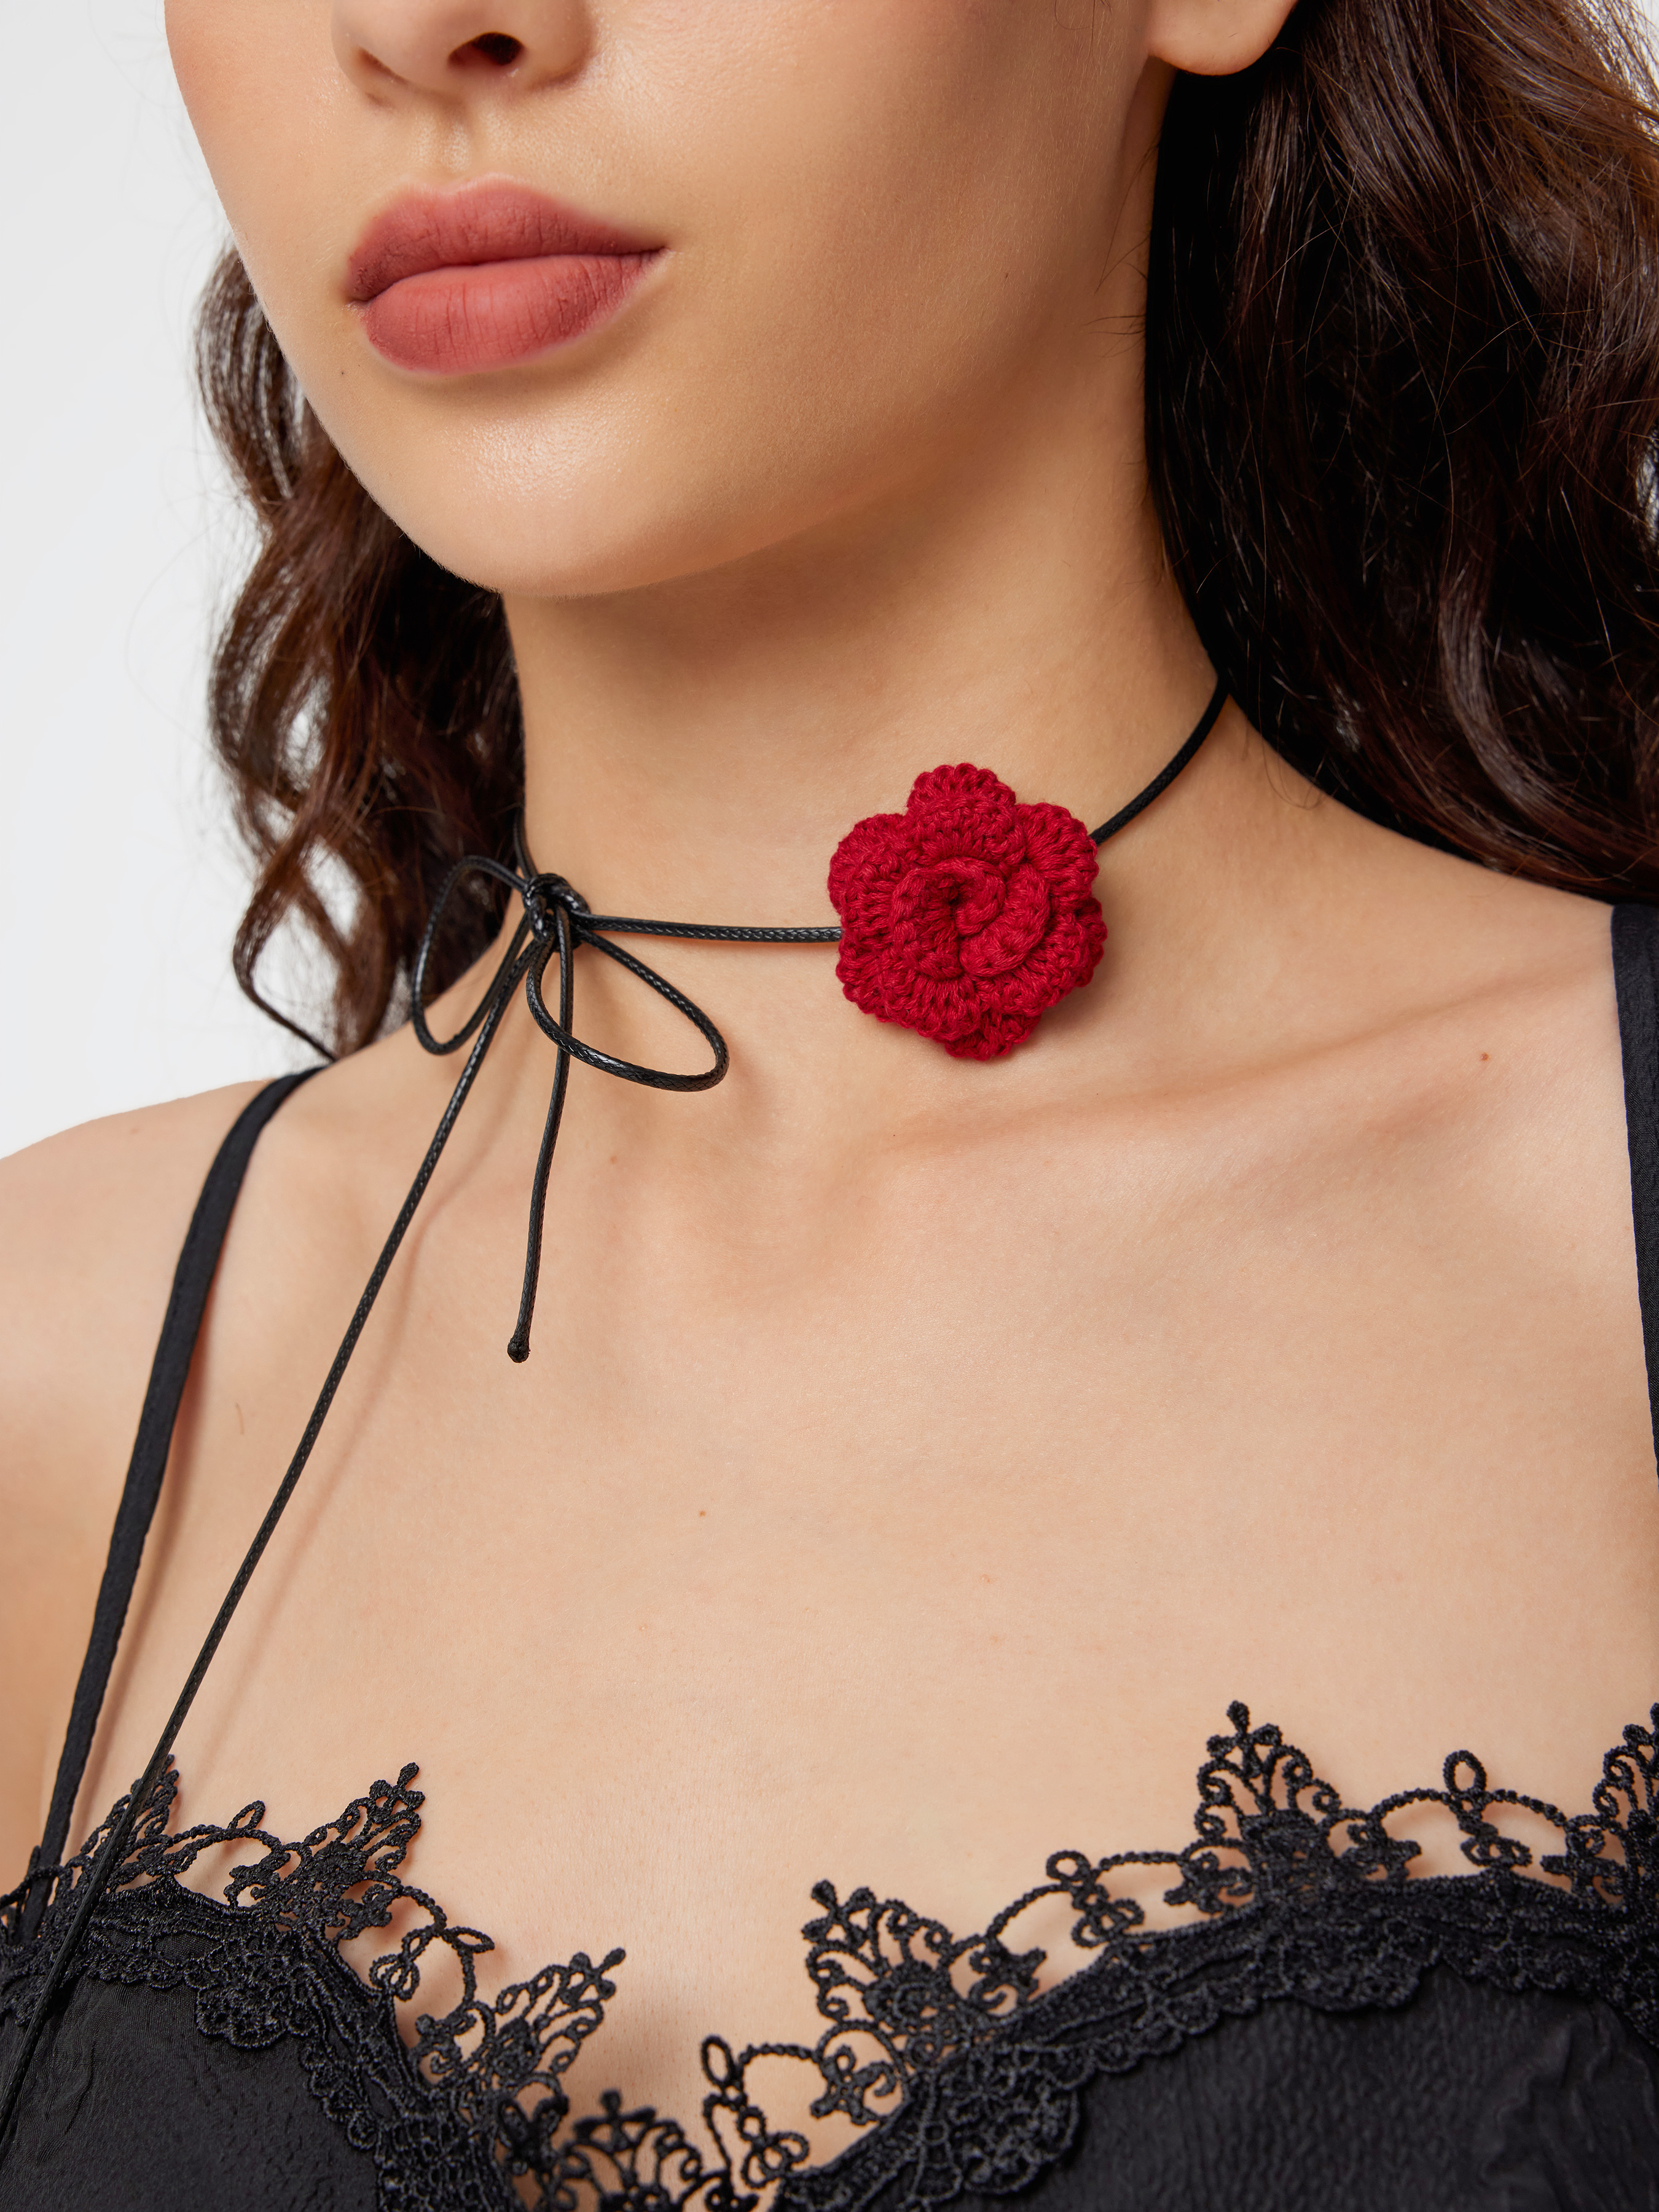 Cider Rose Decor Choker Necklace for Music Festival/Live House Party/Clubbing,One Size/Black